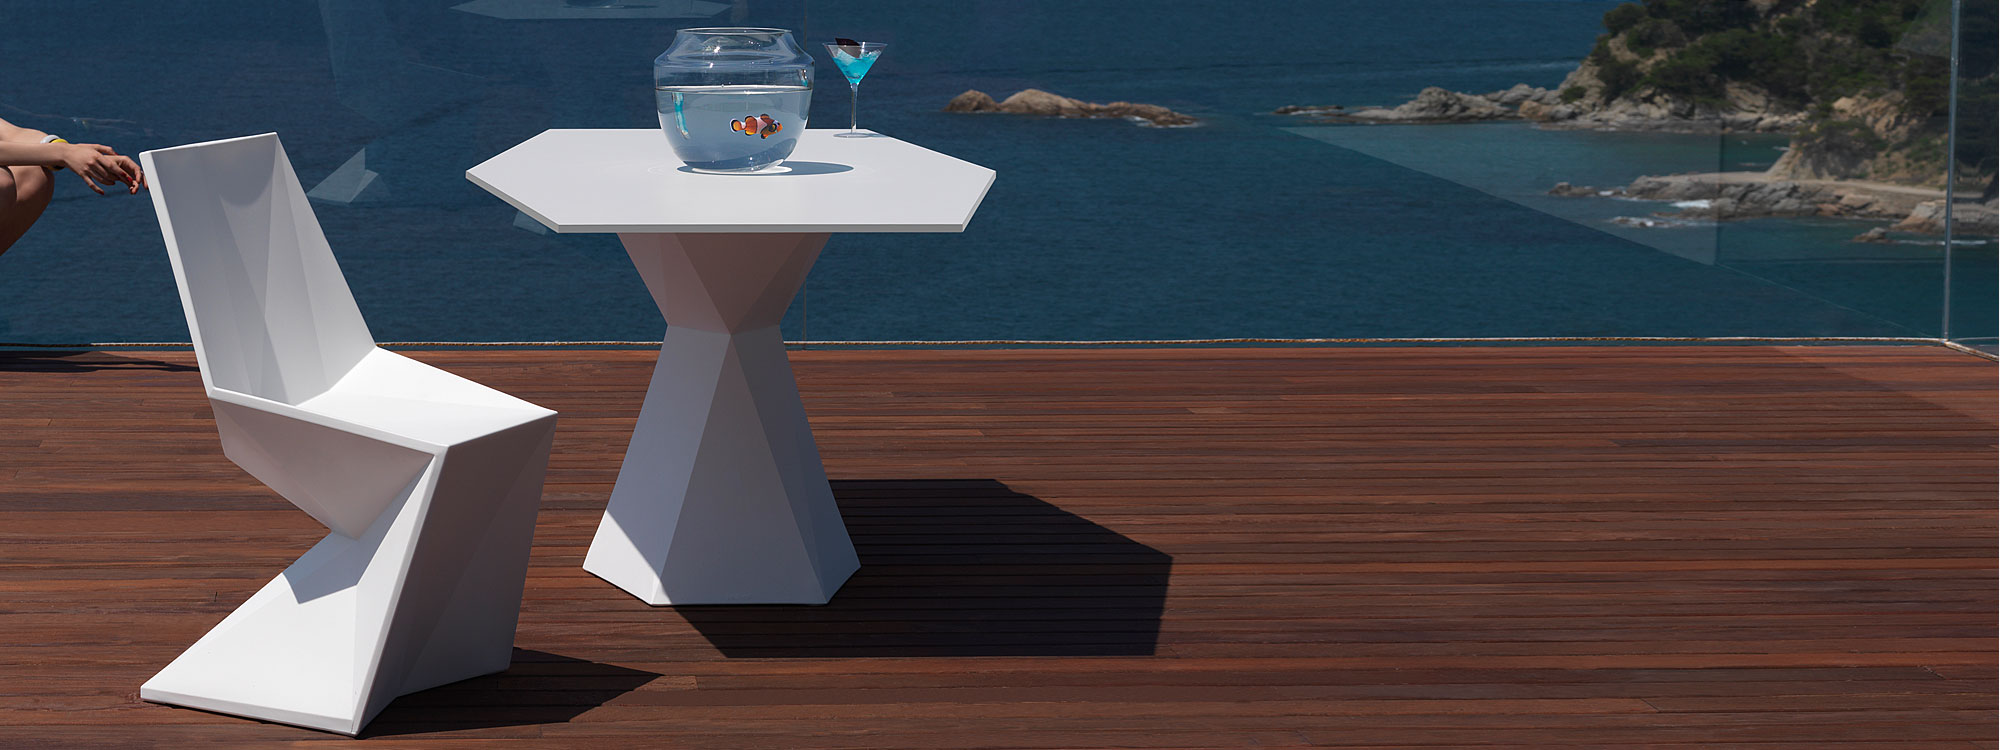 Image of small hexagonal white Vertex table and chair by Vondom on balcony overlooking the sea